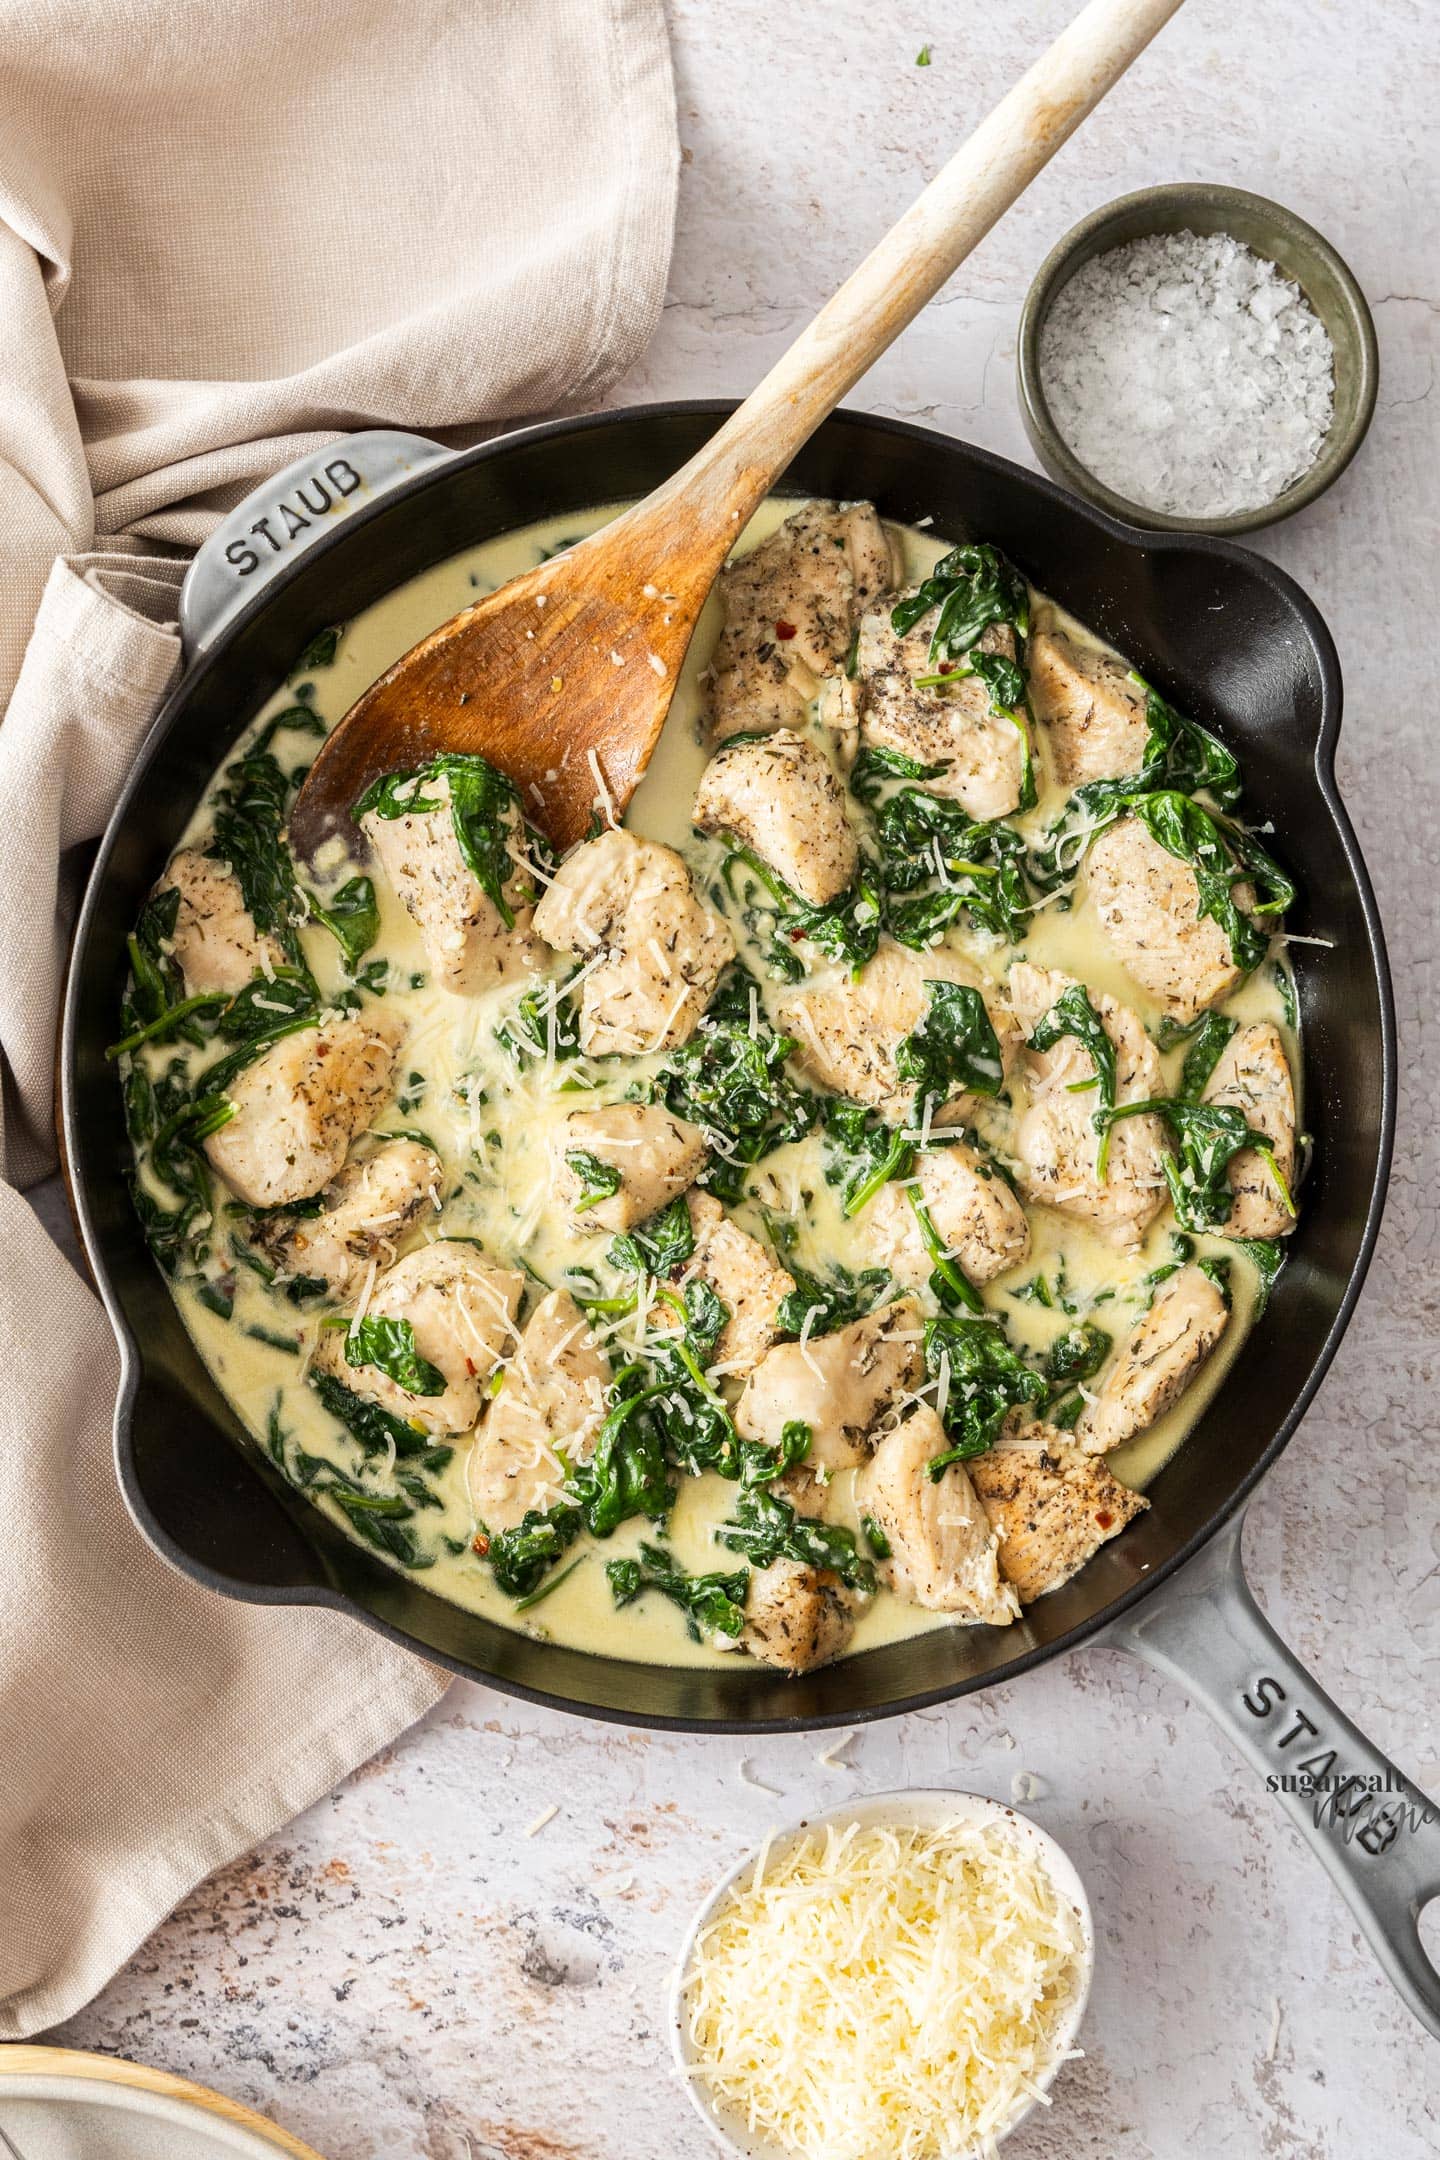 A skillet filled with cooked chicken and spinach in a creamy sauce.